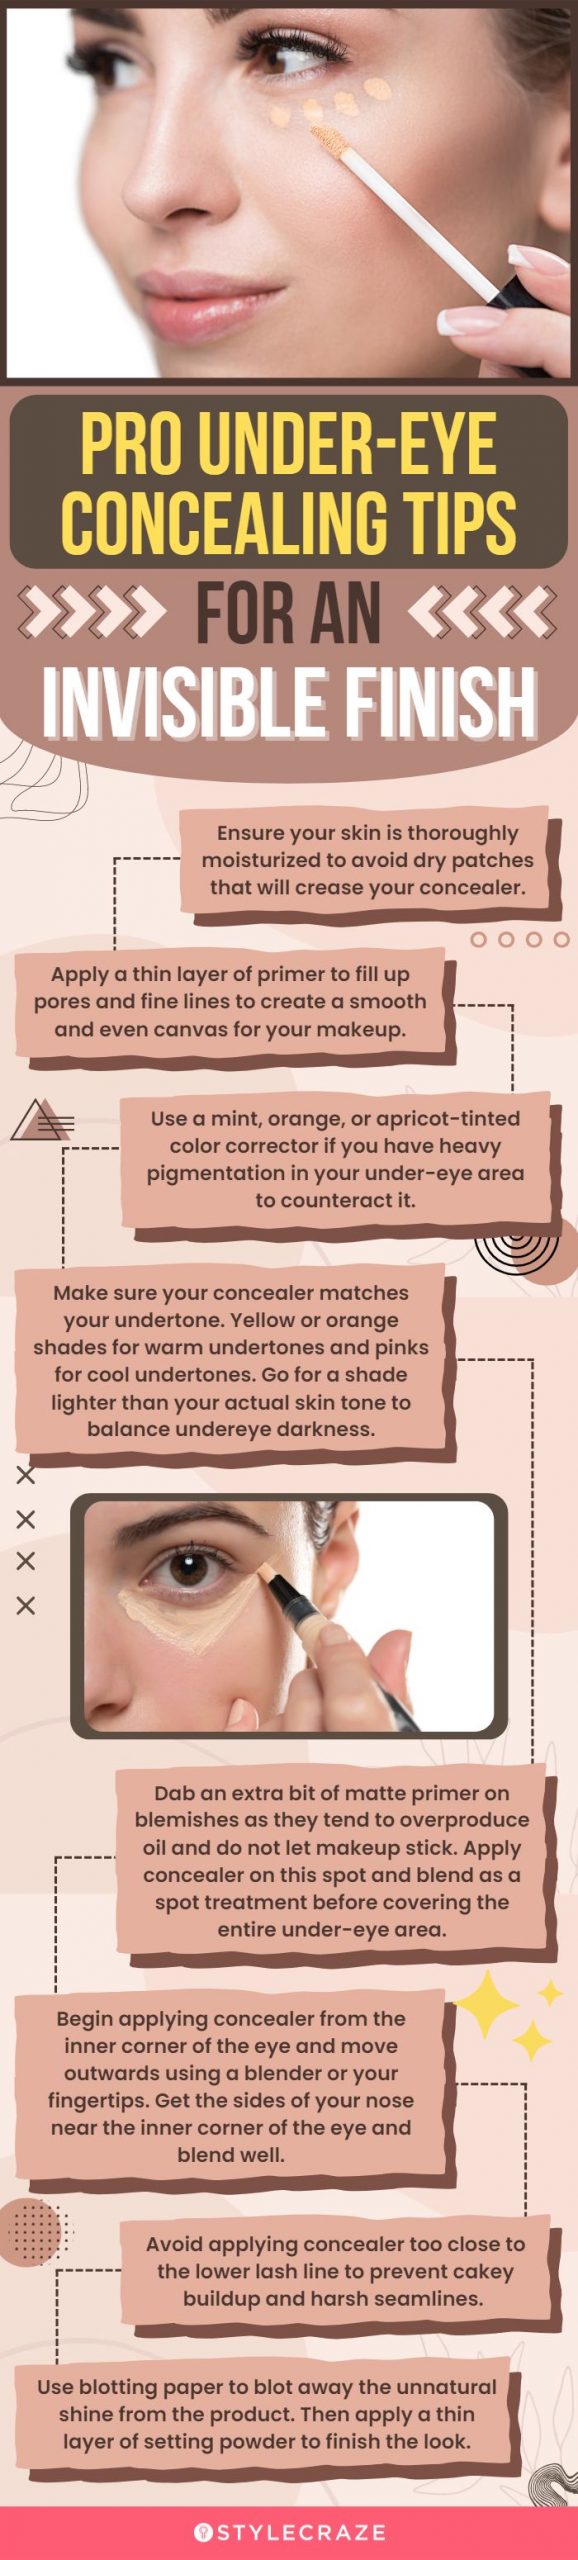 Pro Under-Eye Concealing Tips For An Invisible Finish (infographic)